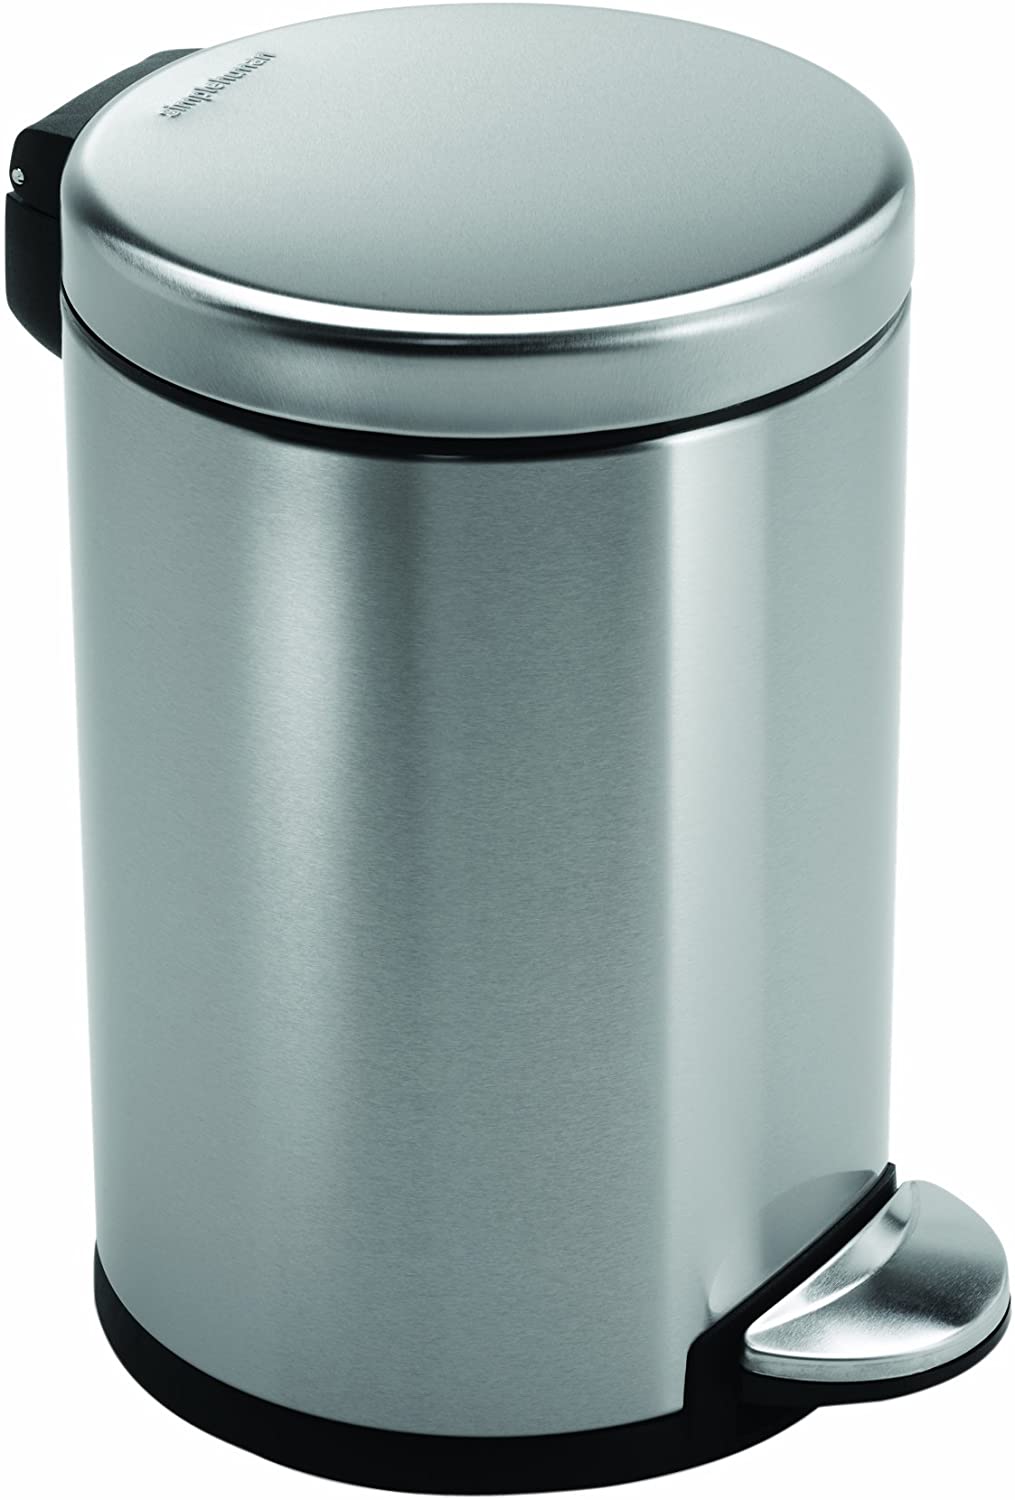 Simplehuman-Round-Pedal-Bin-Brushed-Stainless-Steel-3L